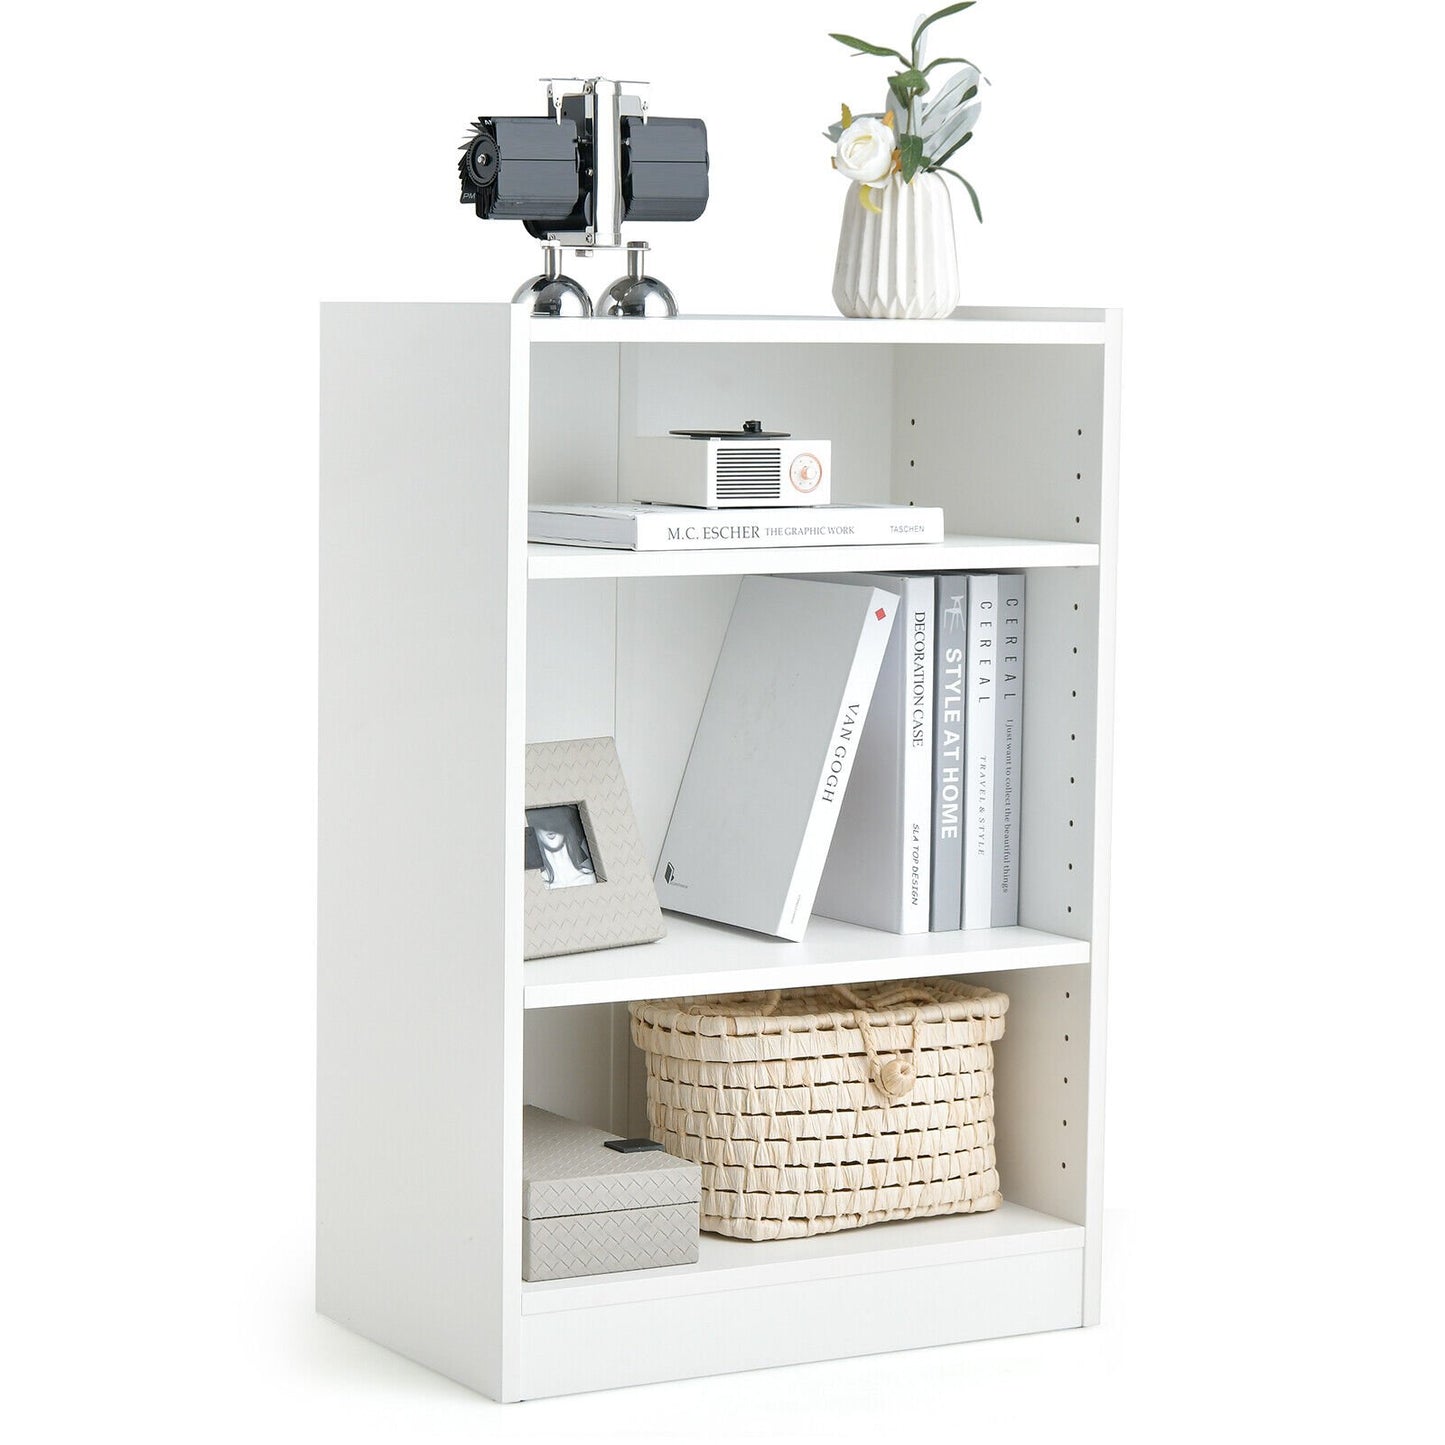 3-Tier Bookcase Open Display Rack Cabinet with Adjustable Shelves, White - Gallery Canada